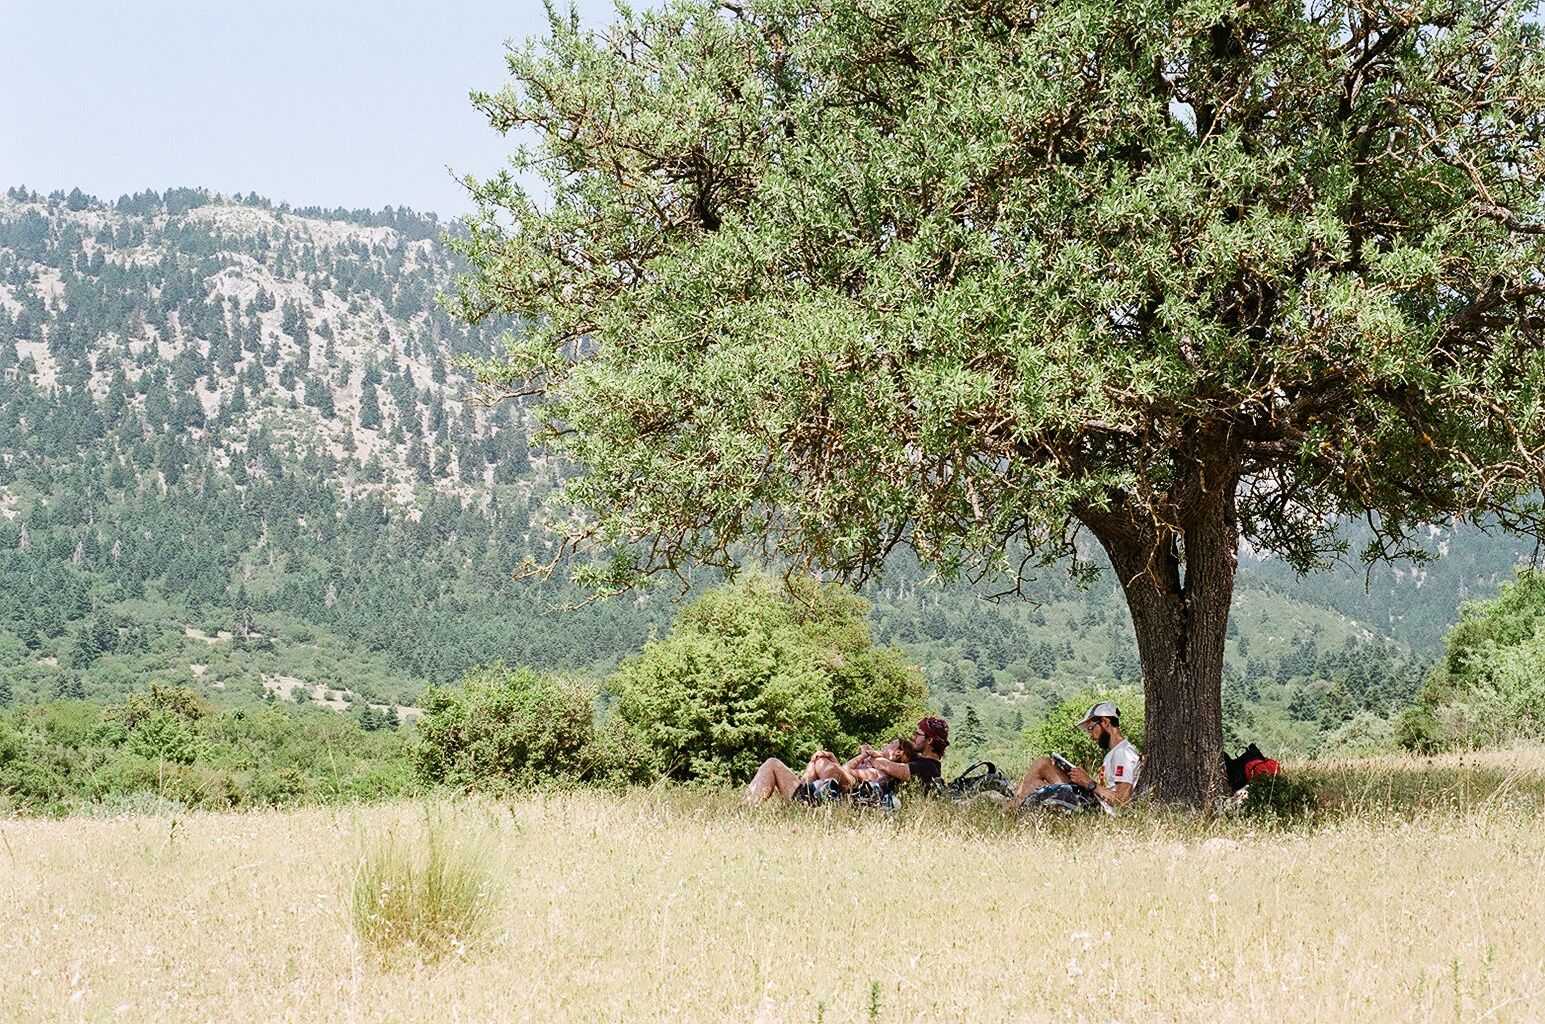 Hikers Resting Under The Tree